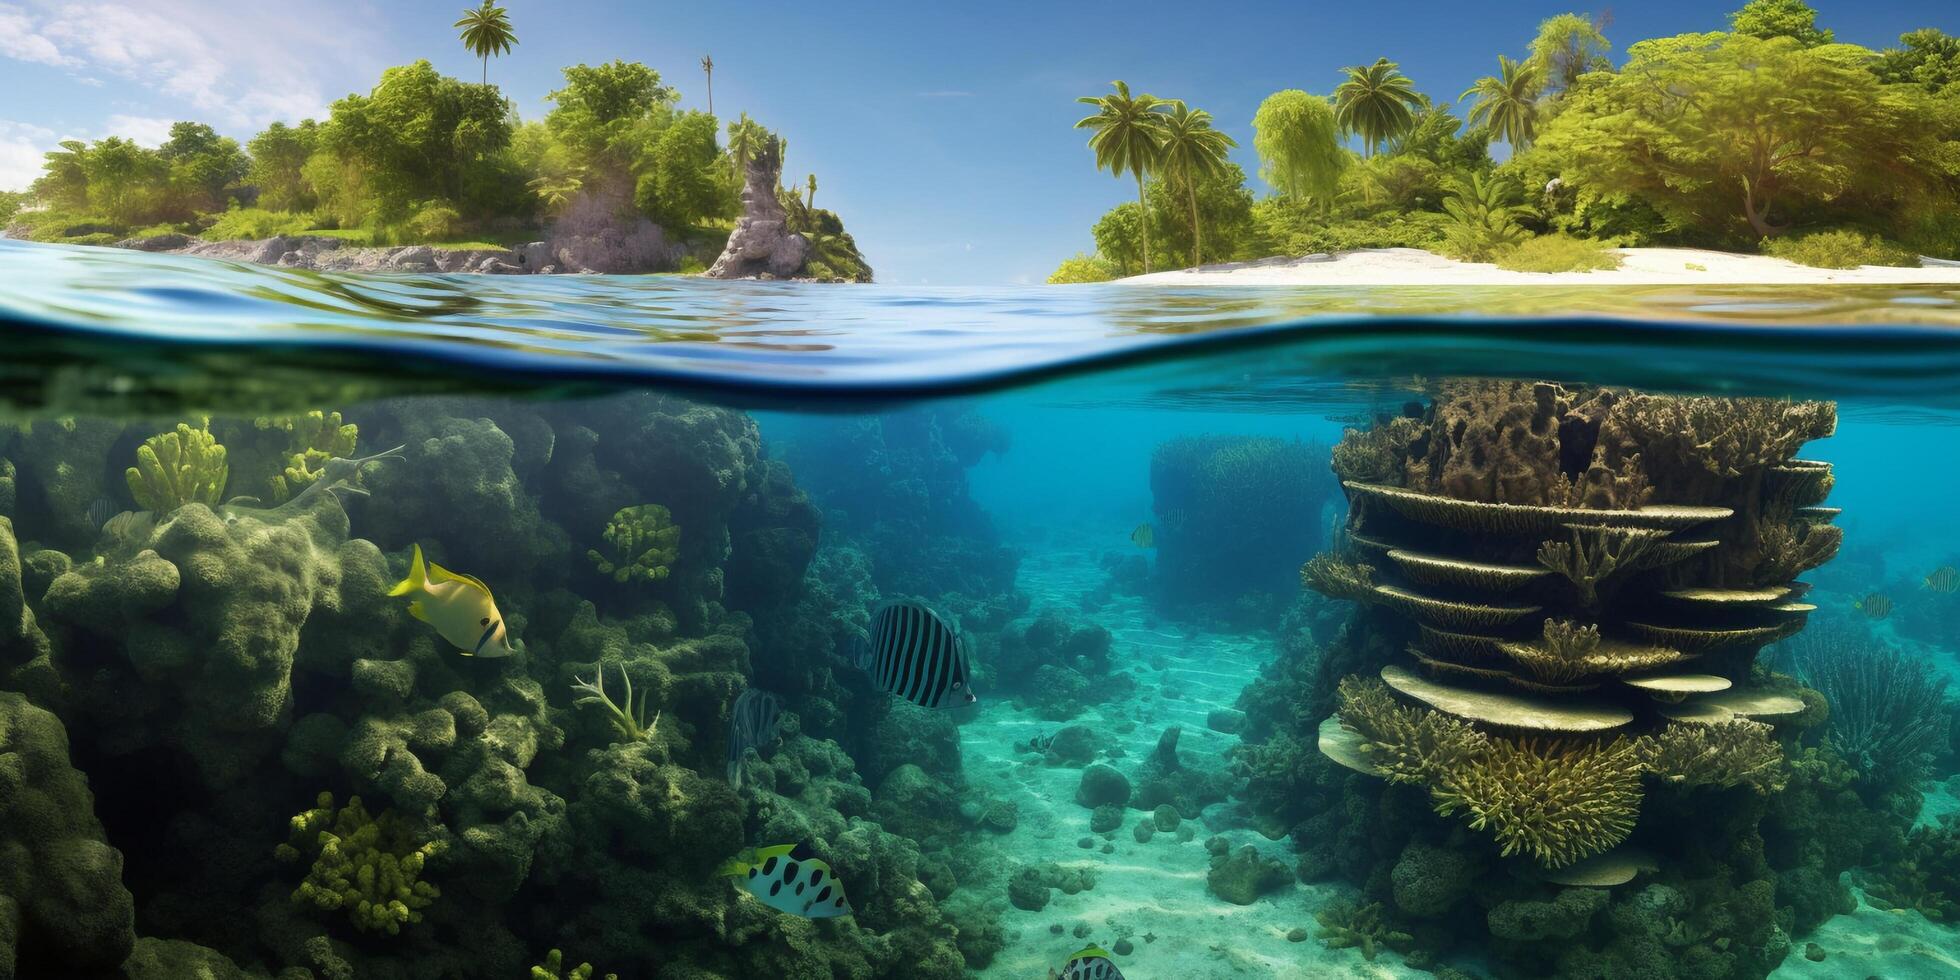 Underwater view of tropical island with coral reef and sandy beach with . photo